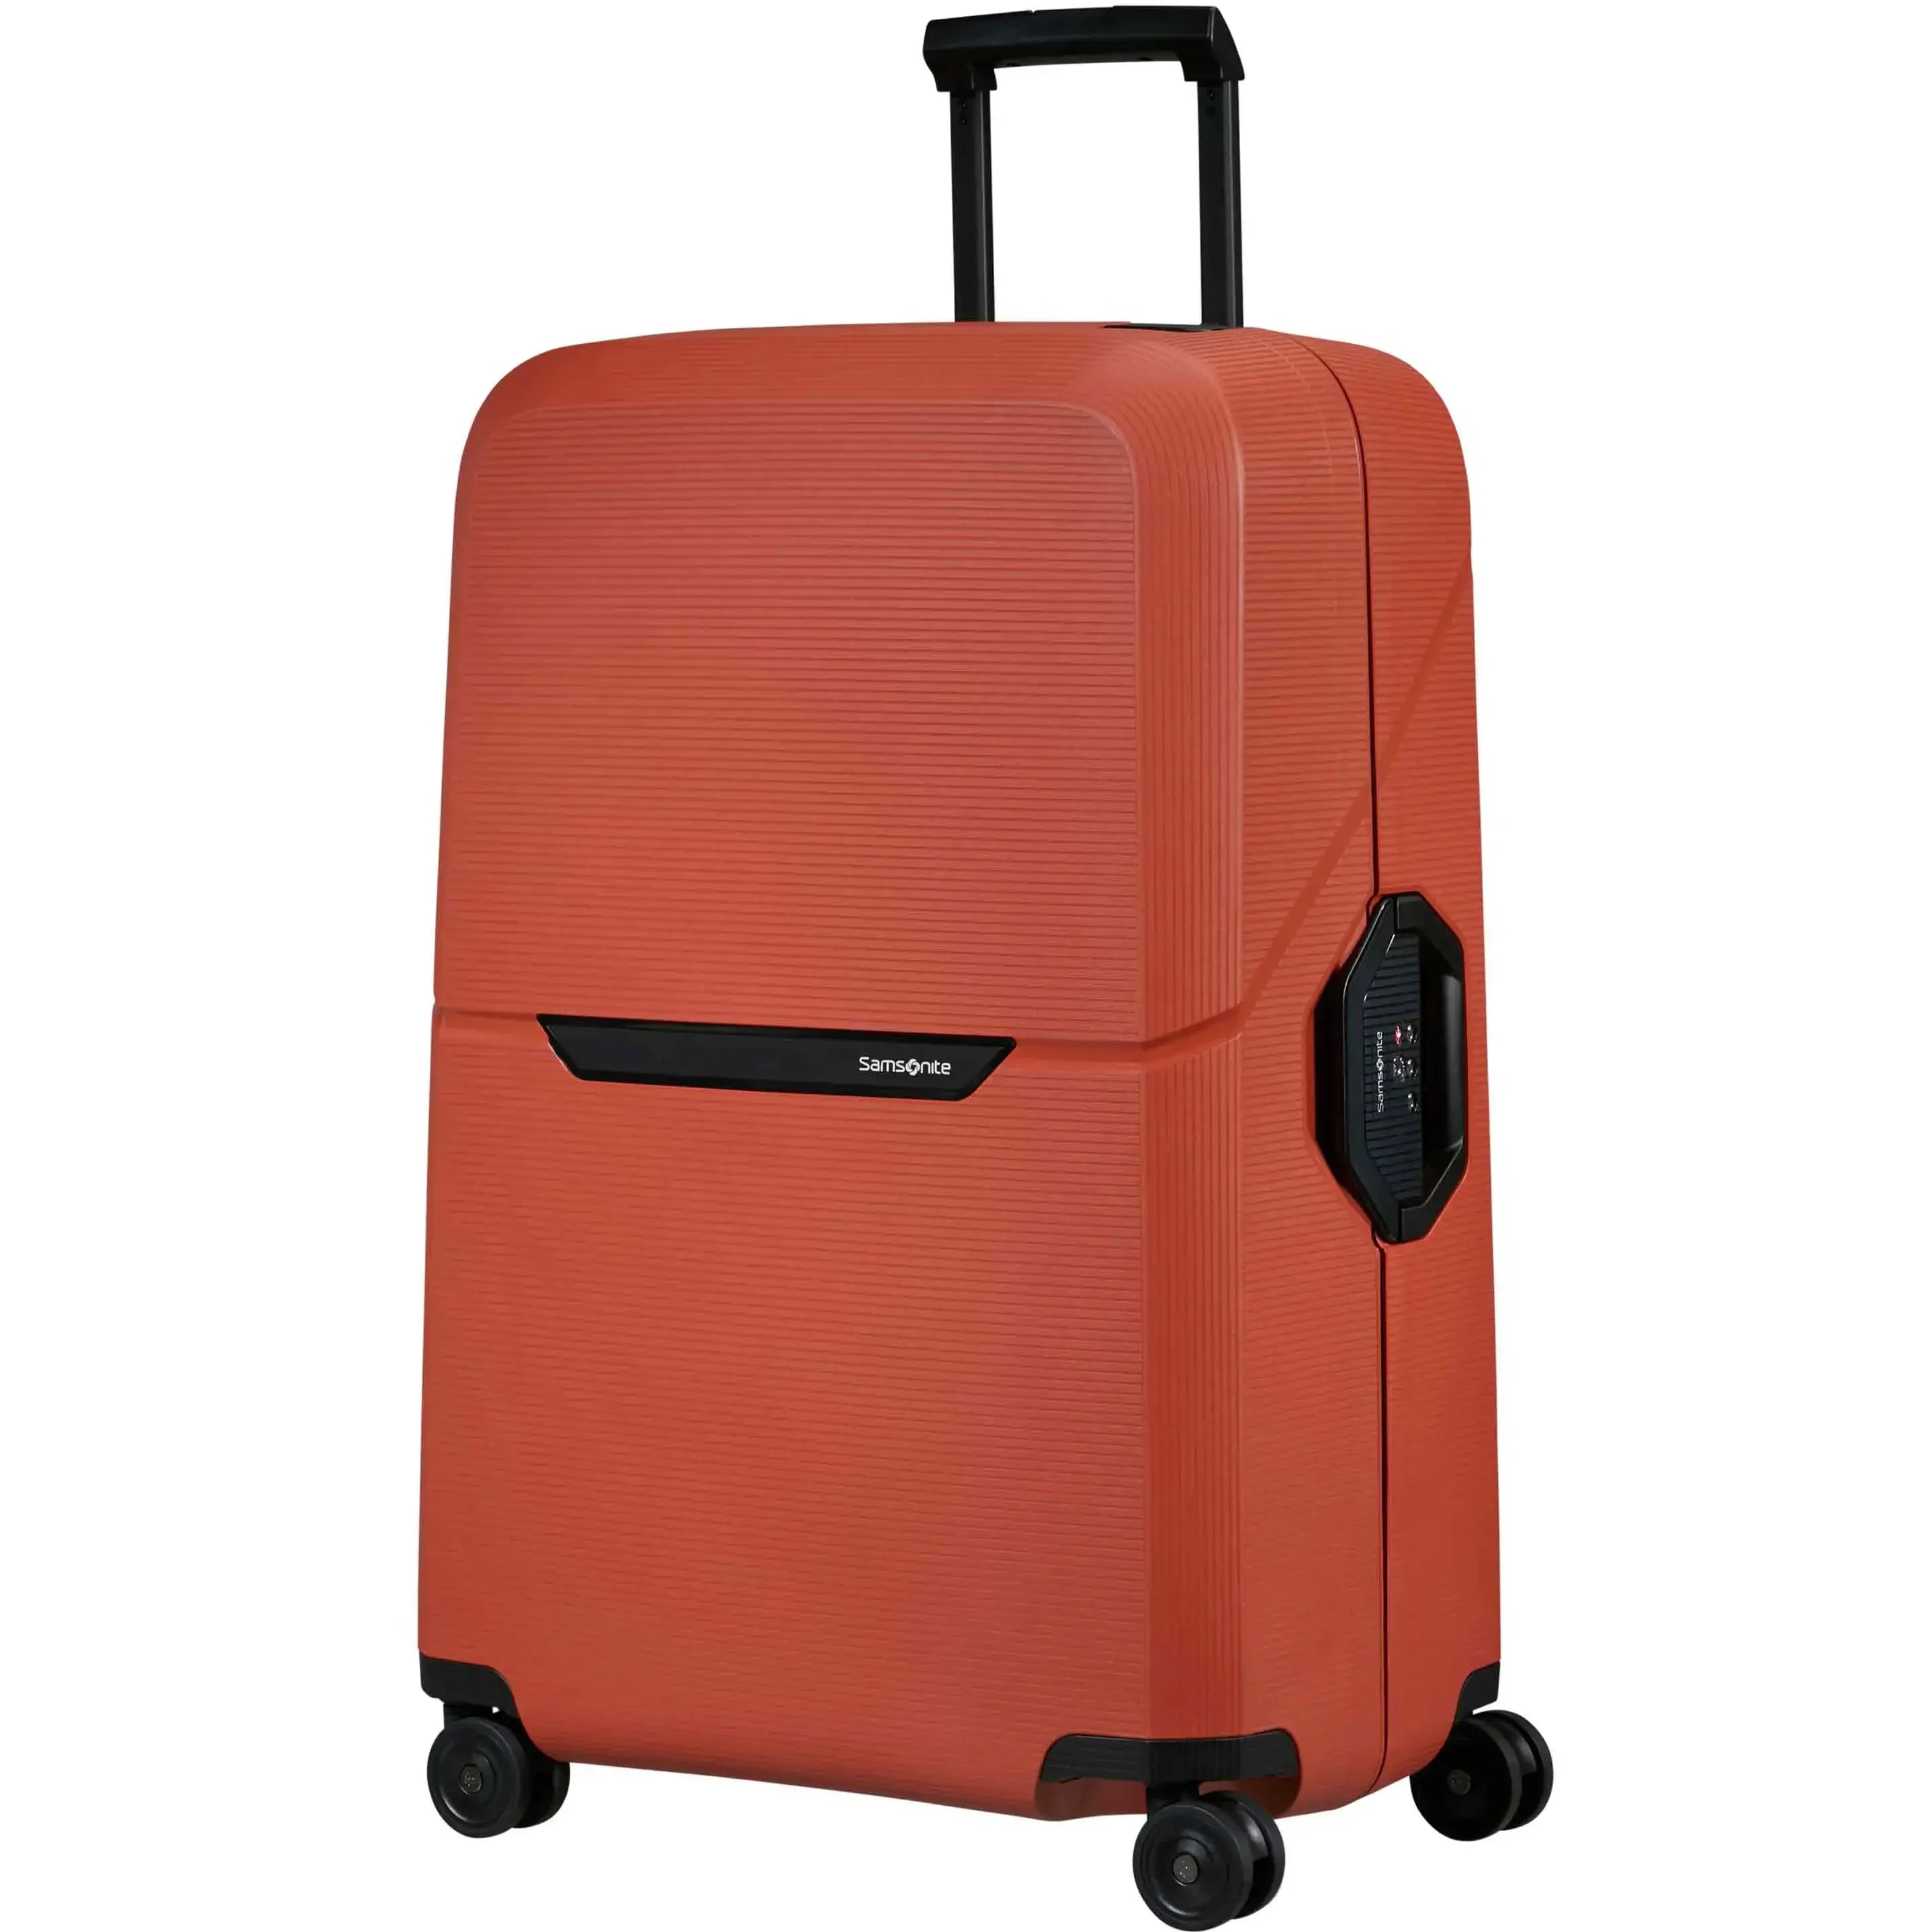 The perfect solution for trolleys Page all 2 requirements - – from Samsonite